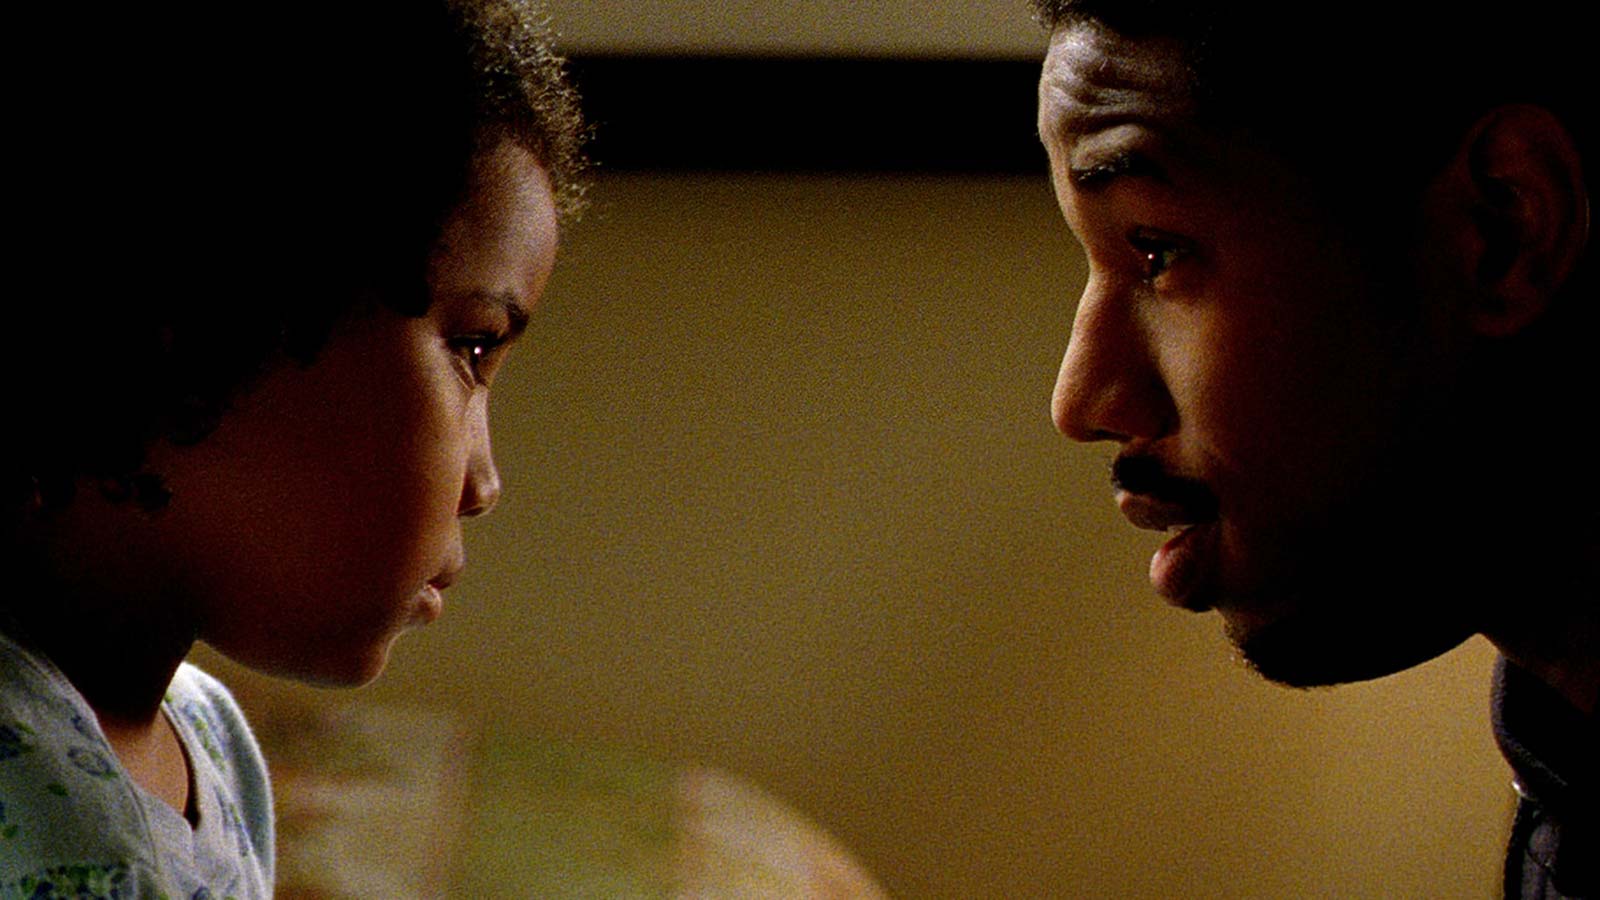 When 'Fruitvale Station' hit the indie movie scene in 2013, it made waves thanks to the story of Oscar Grant being portrayed in an honest light. 